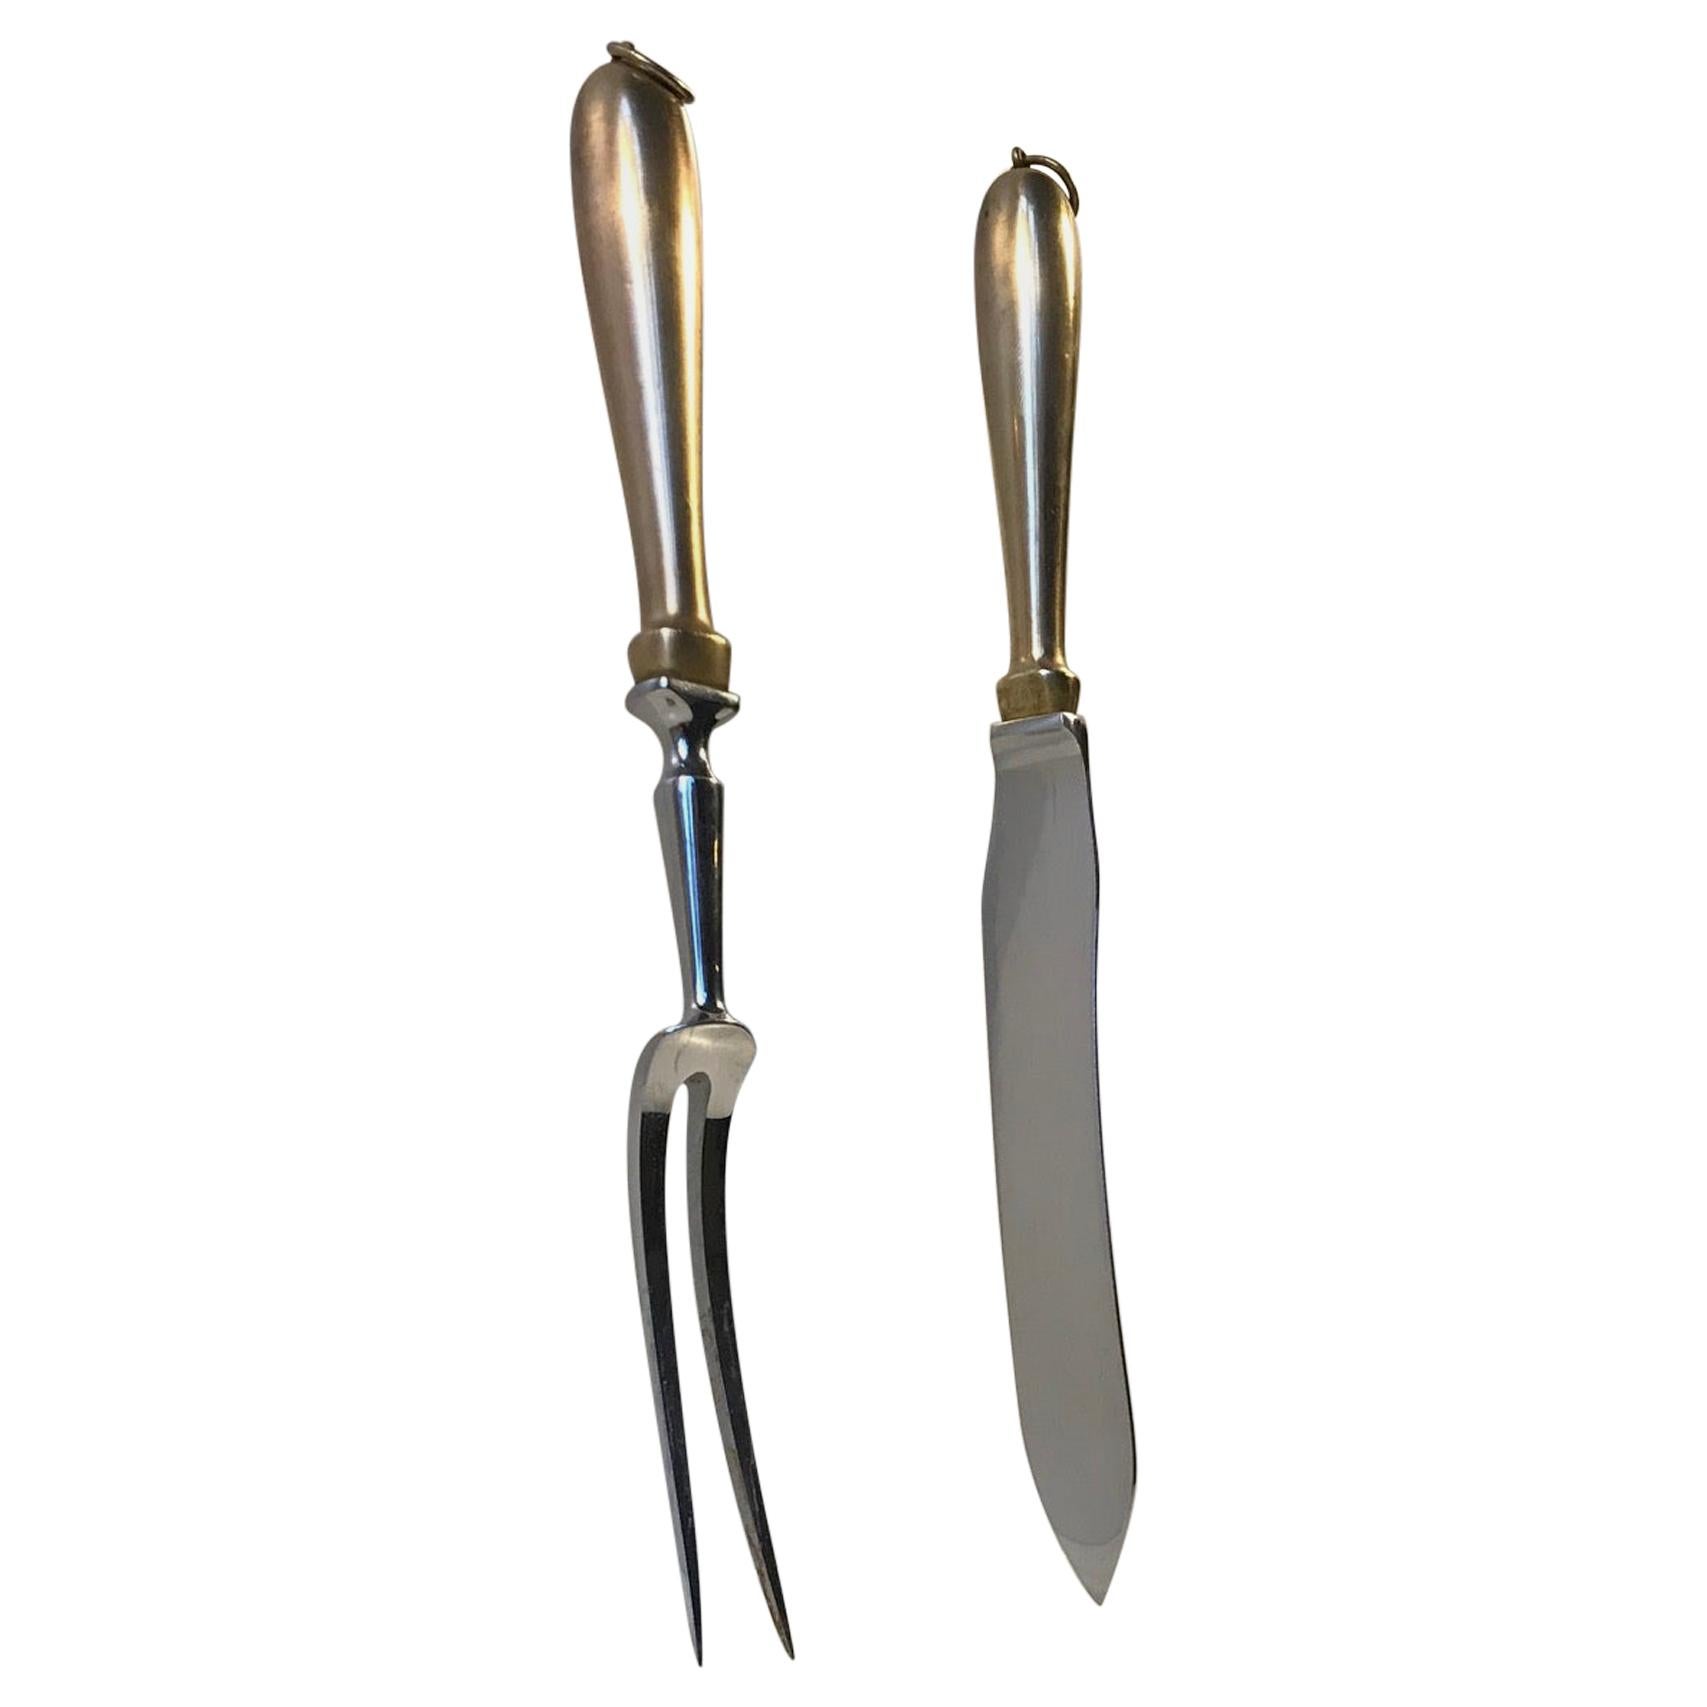 Georg Jensen Carving Set with Organically Shaped Solid Brass Handles, circa 1950 For Sale